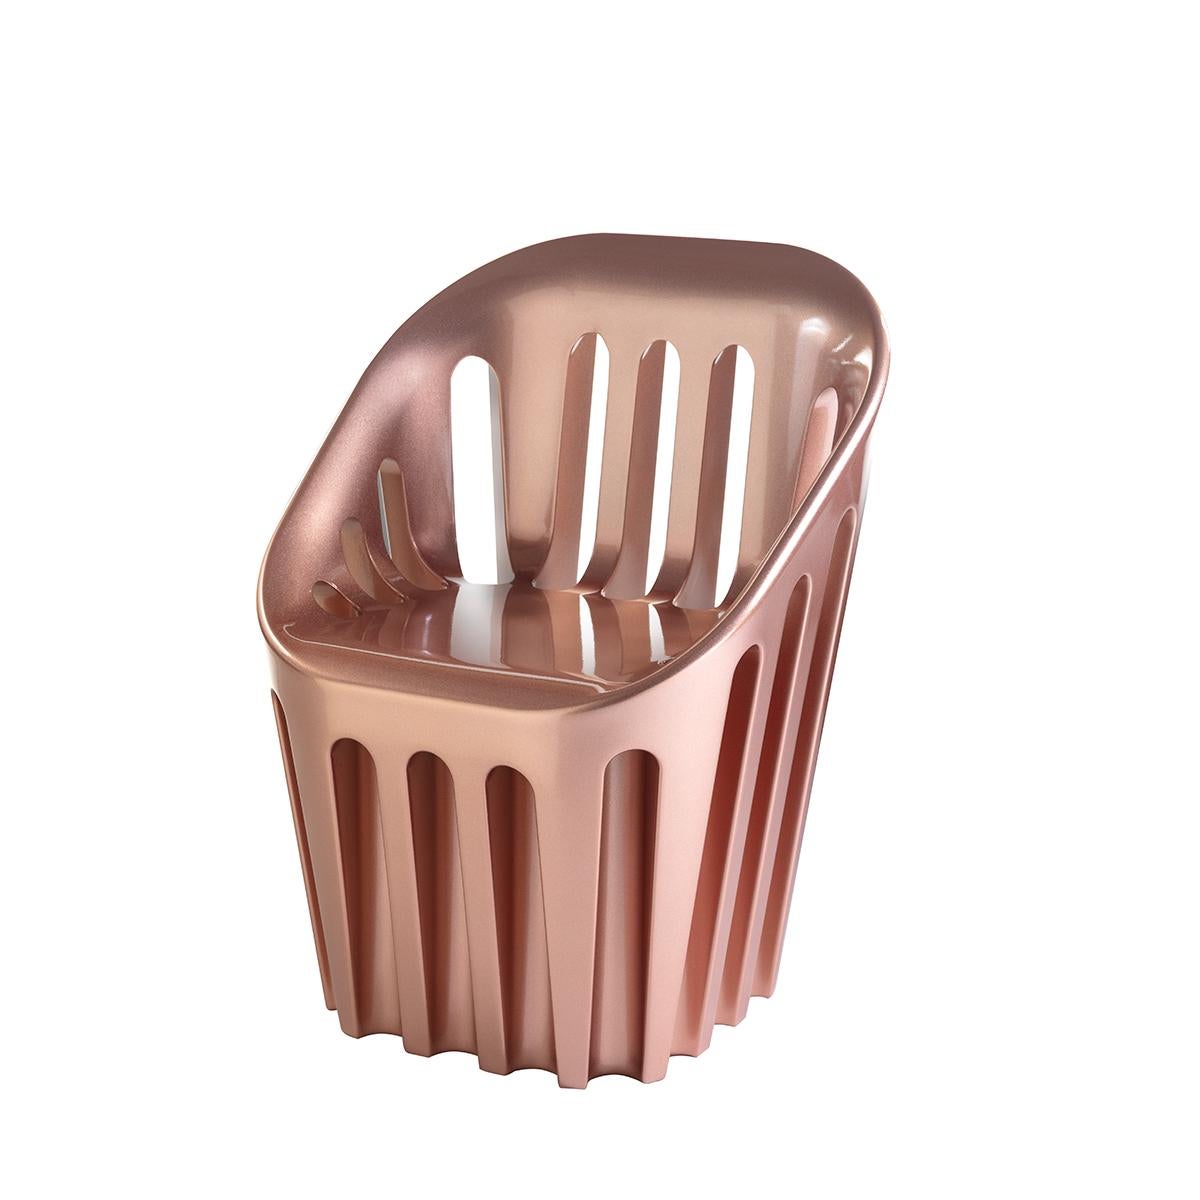 Metallic Gold Glossy Coliseum Chair by Alvaro Uribe For Sale 5